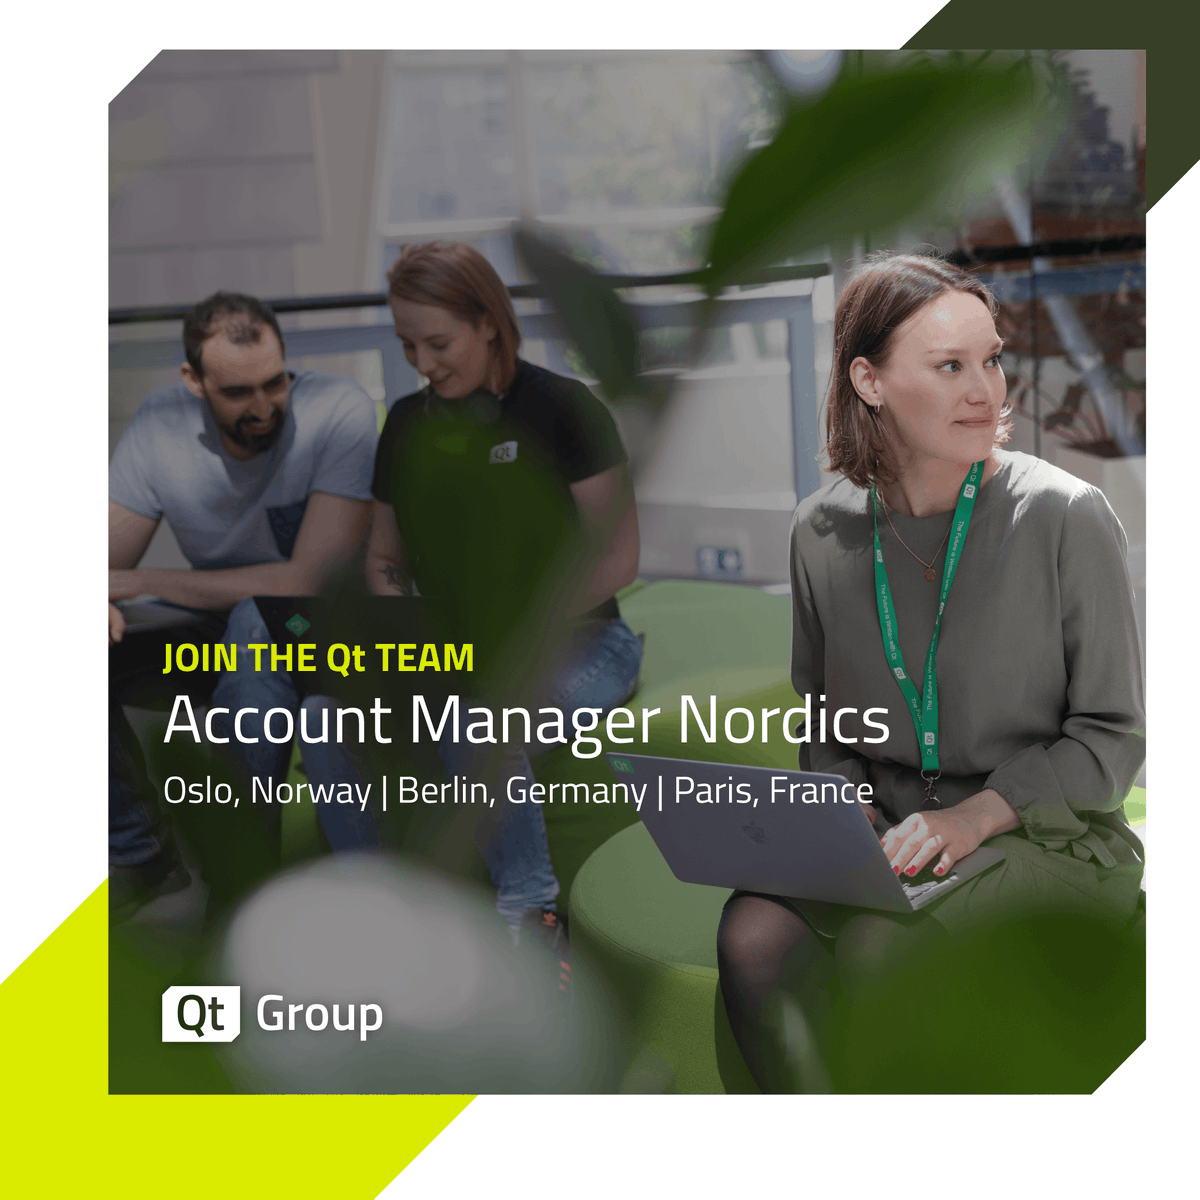 📣 We're seeking an Account Manager, Nordics, to join our Oslo, Norway 🇳🇴 Berlin, Germany 🇩🇪 or Paris, France 🇫🇷 team!

Learn more and apply: hubs.li/Q02xwFNq0

#NowHiring #JoinOurTeam #AccountManager #Oslo #Paris #Berlin